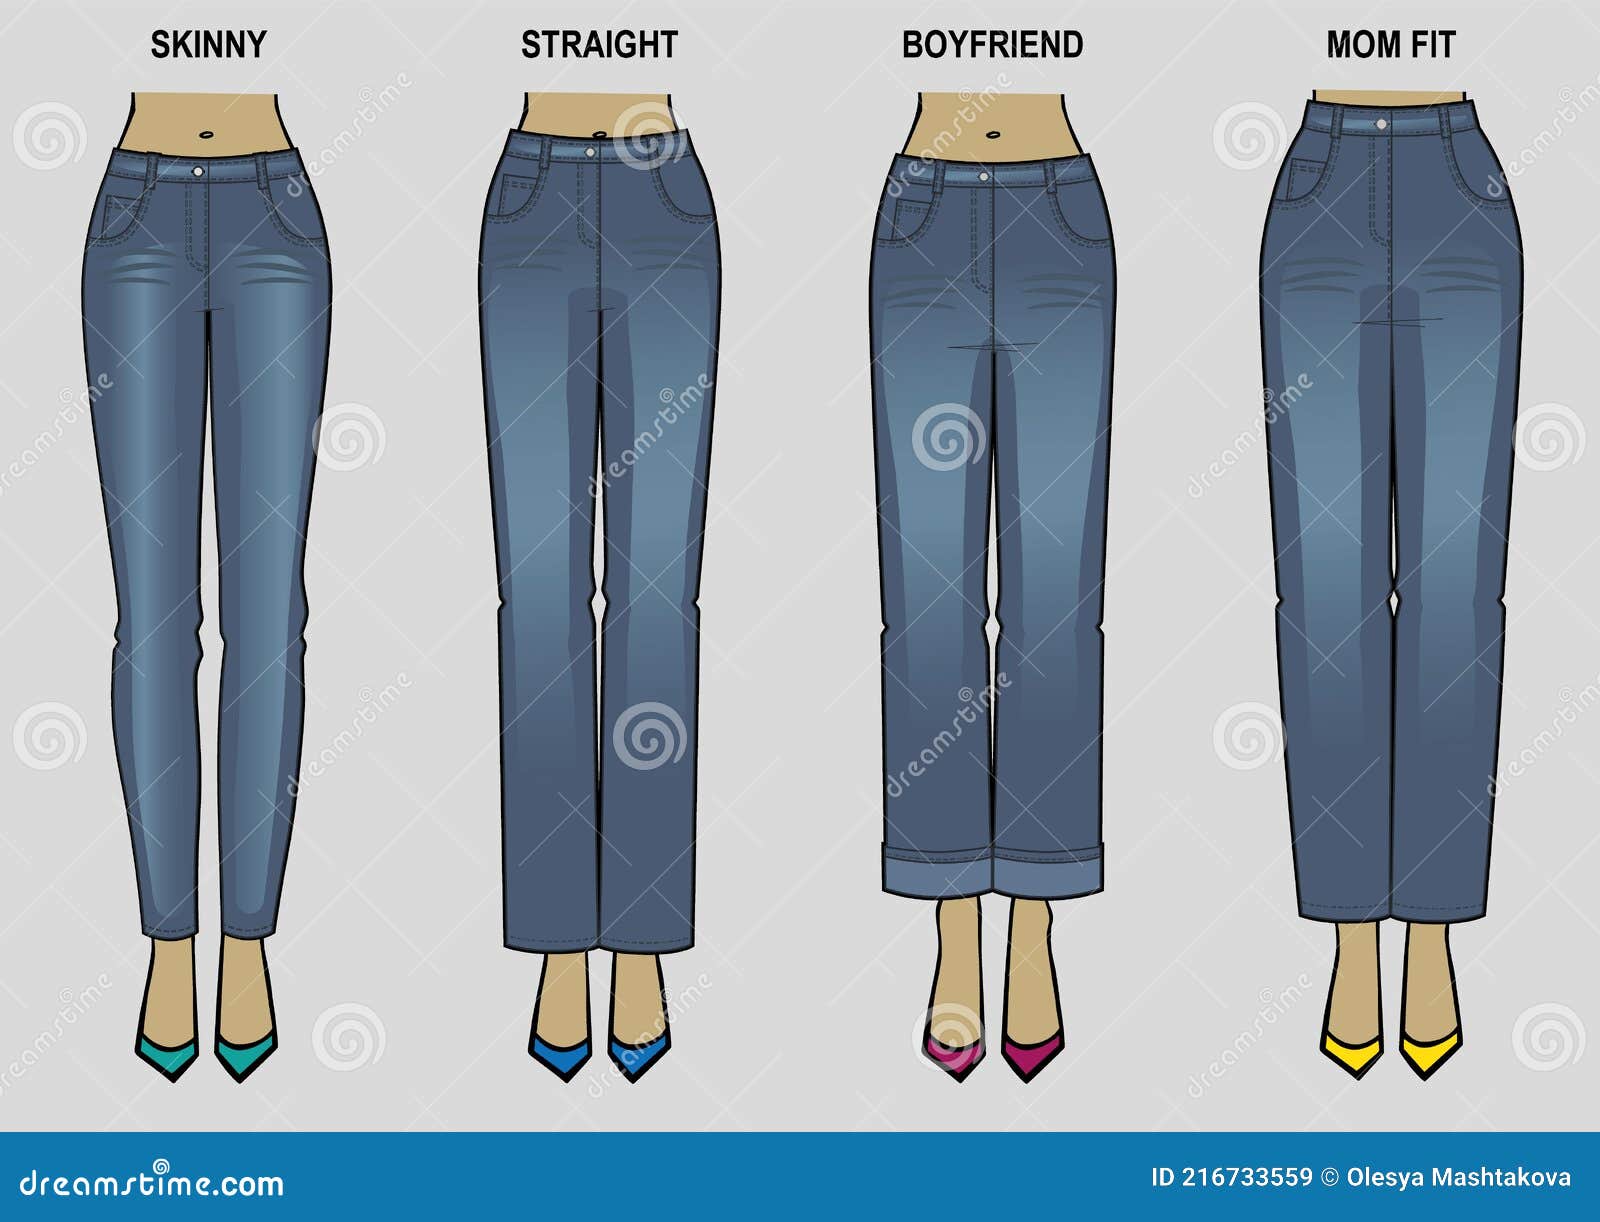 18 Best Jeans for Women 2020  Best Fitting Jeans by Style and Body Type